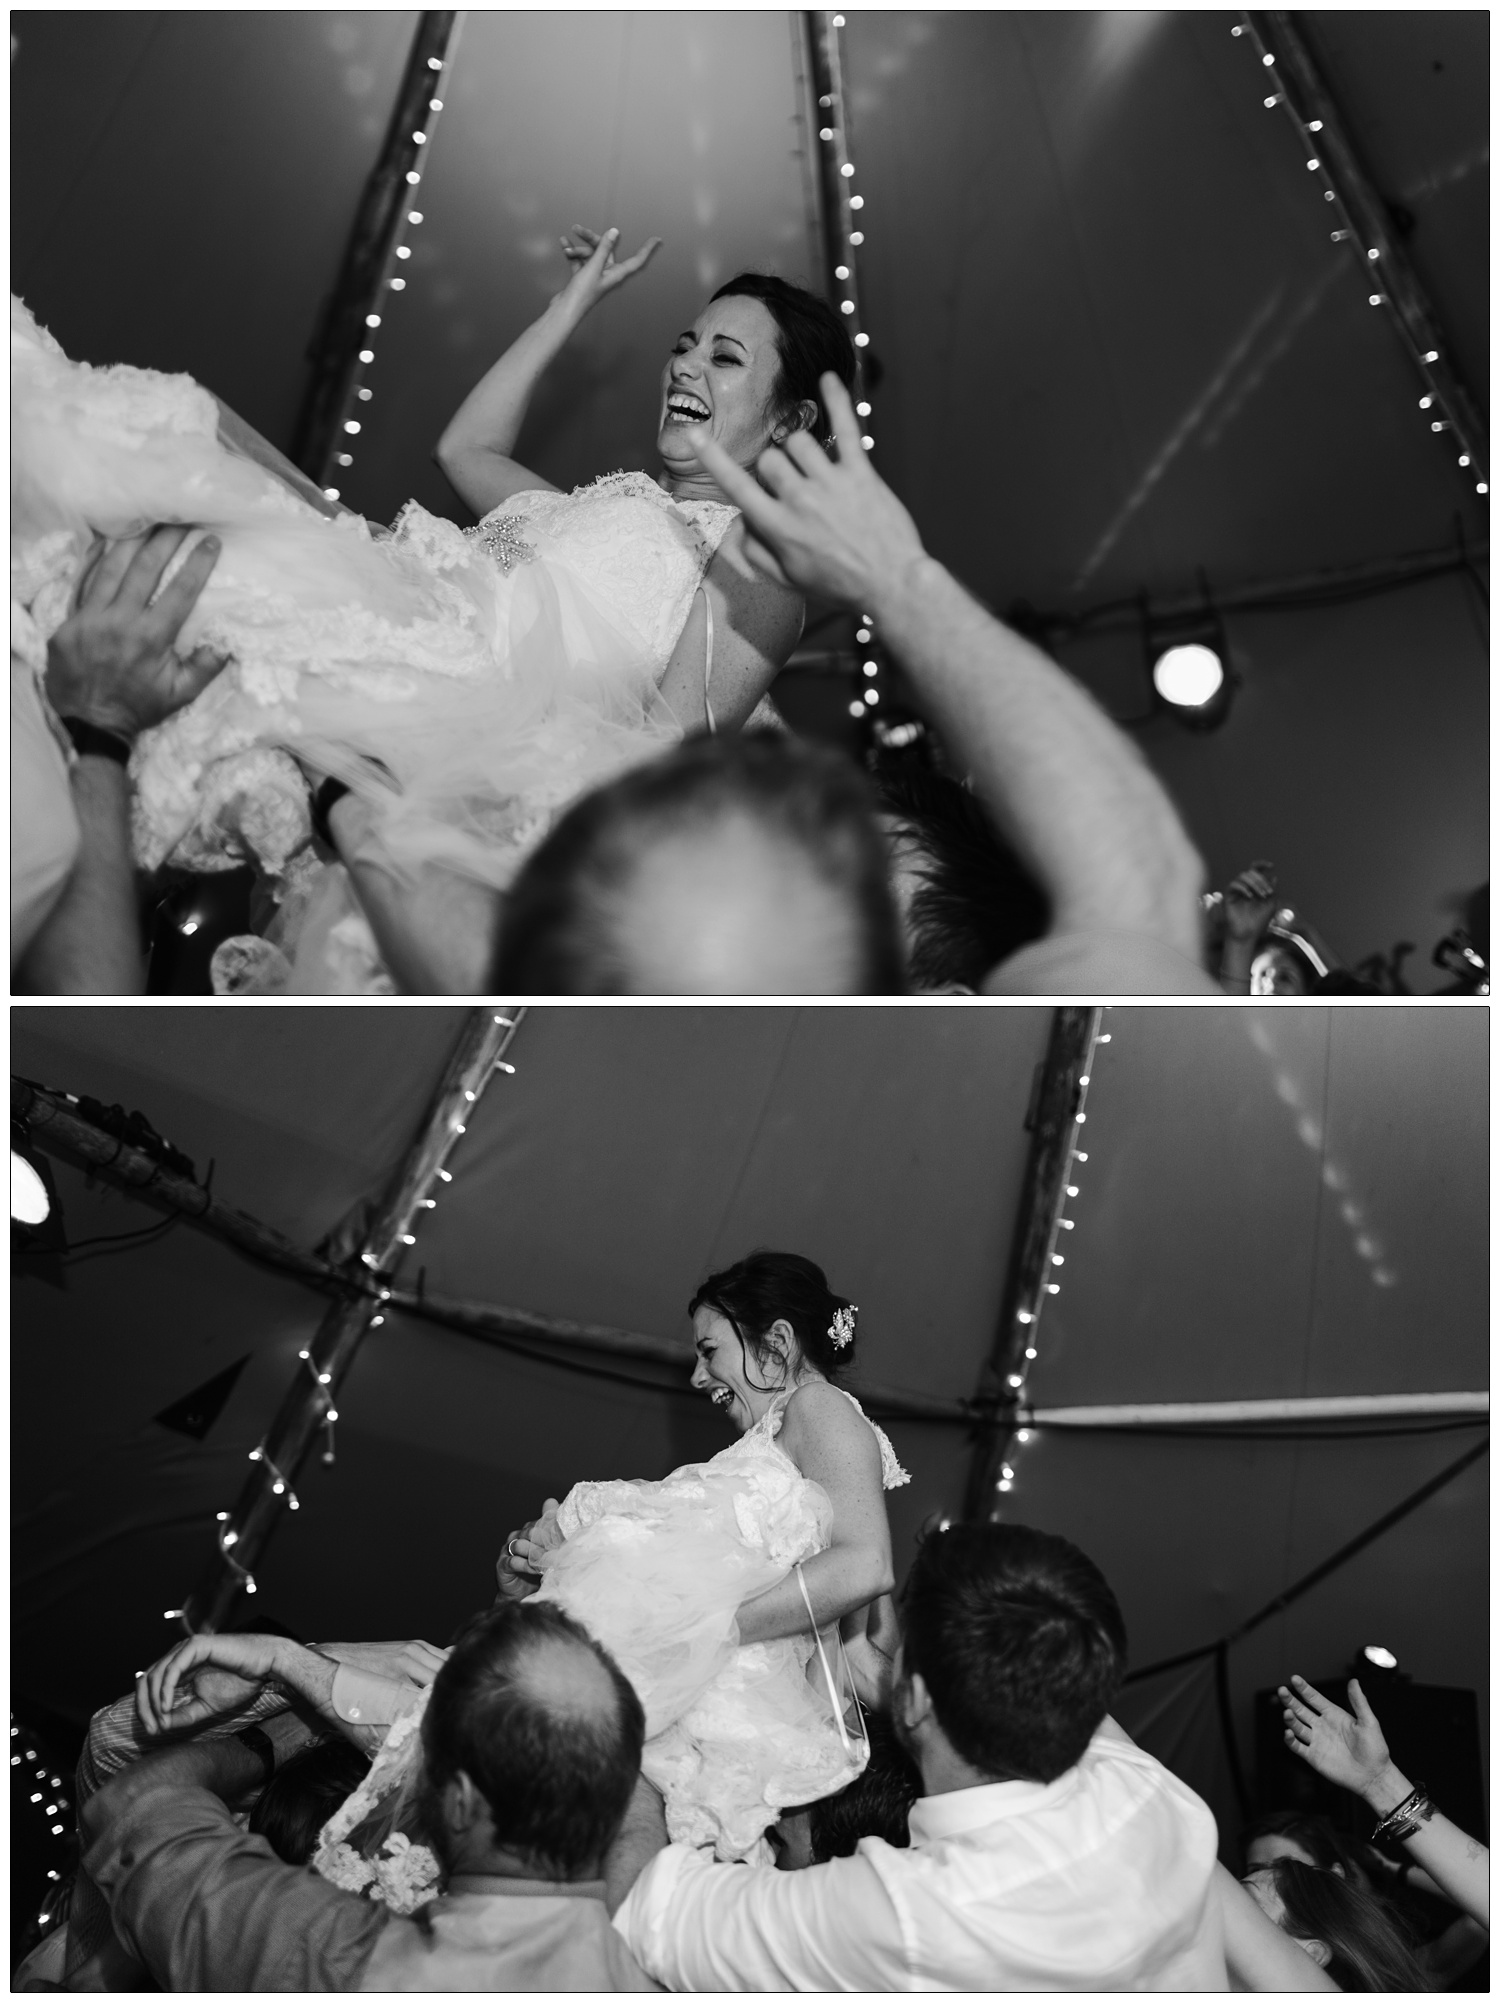 Bride in a lace wedding dress is crowd surfing at her wedding. A man is doing rock fingers.